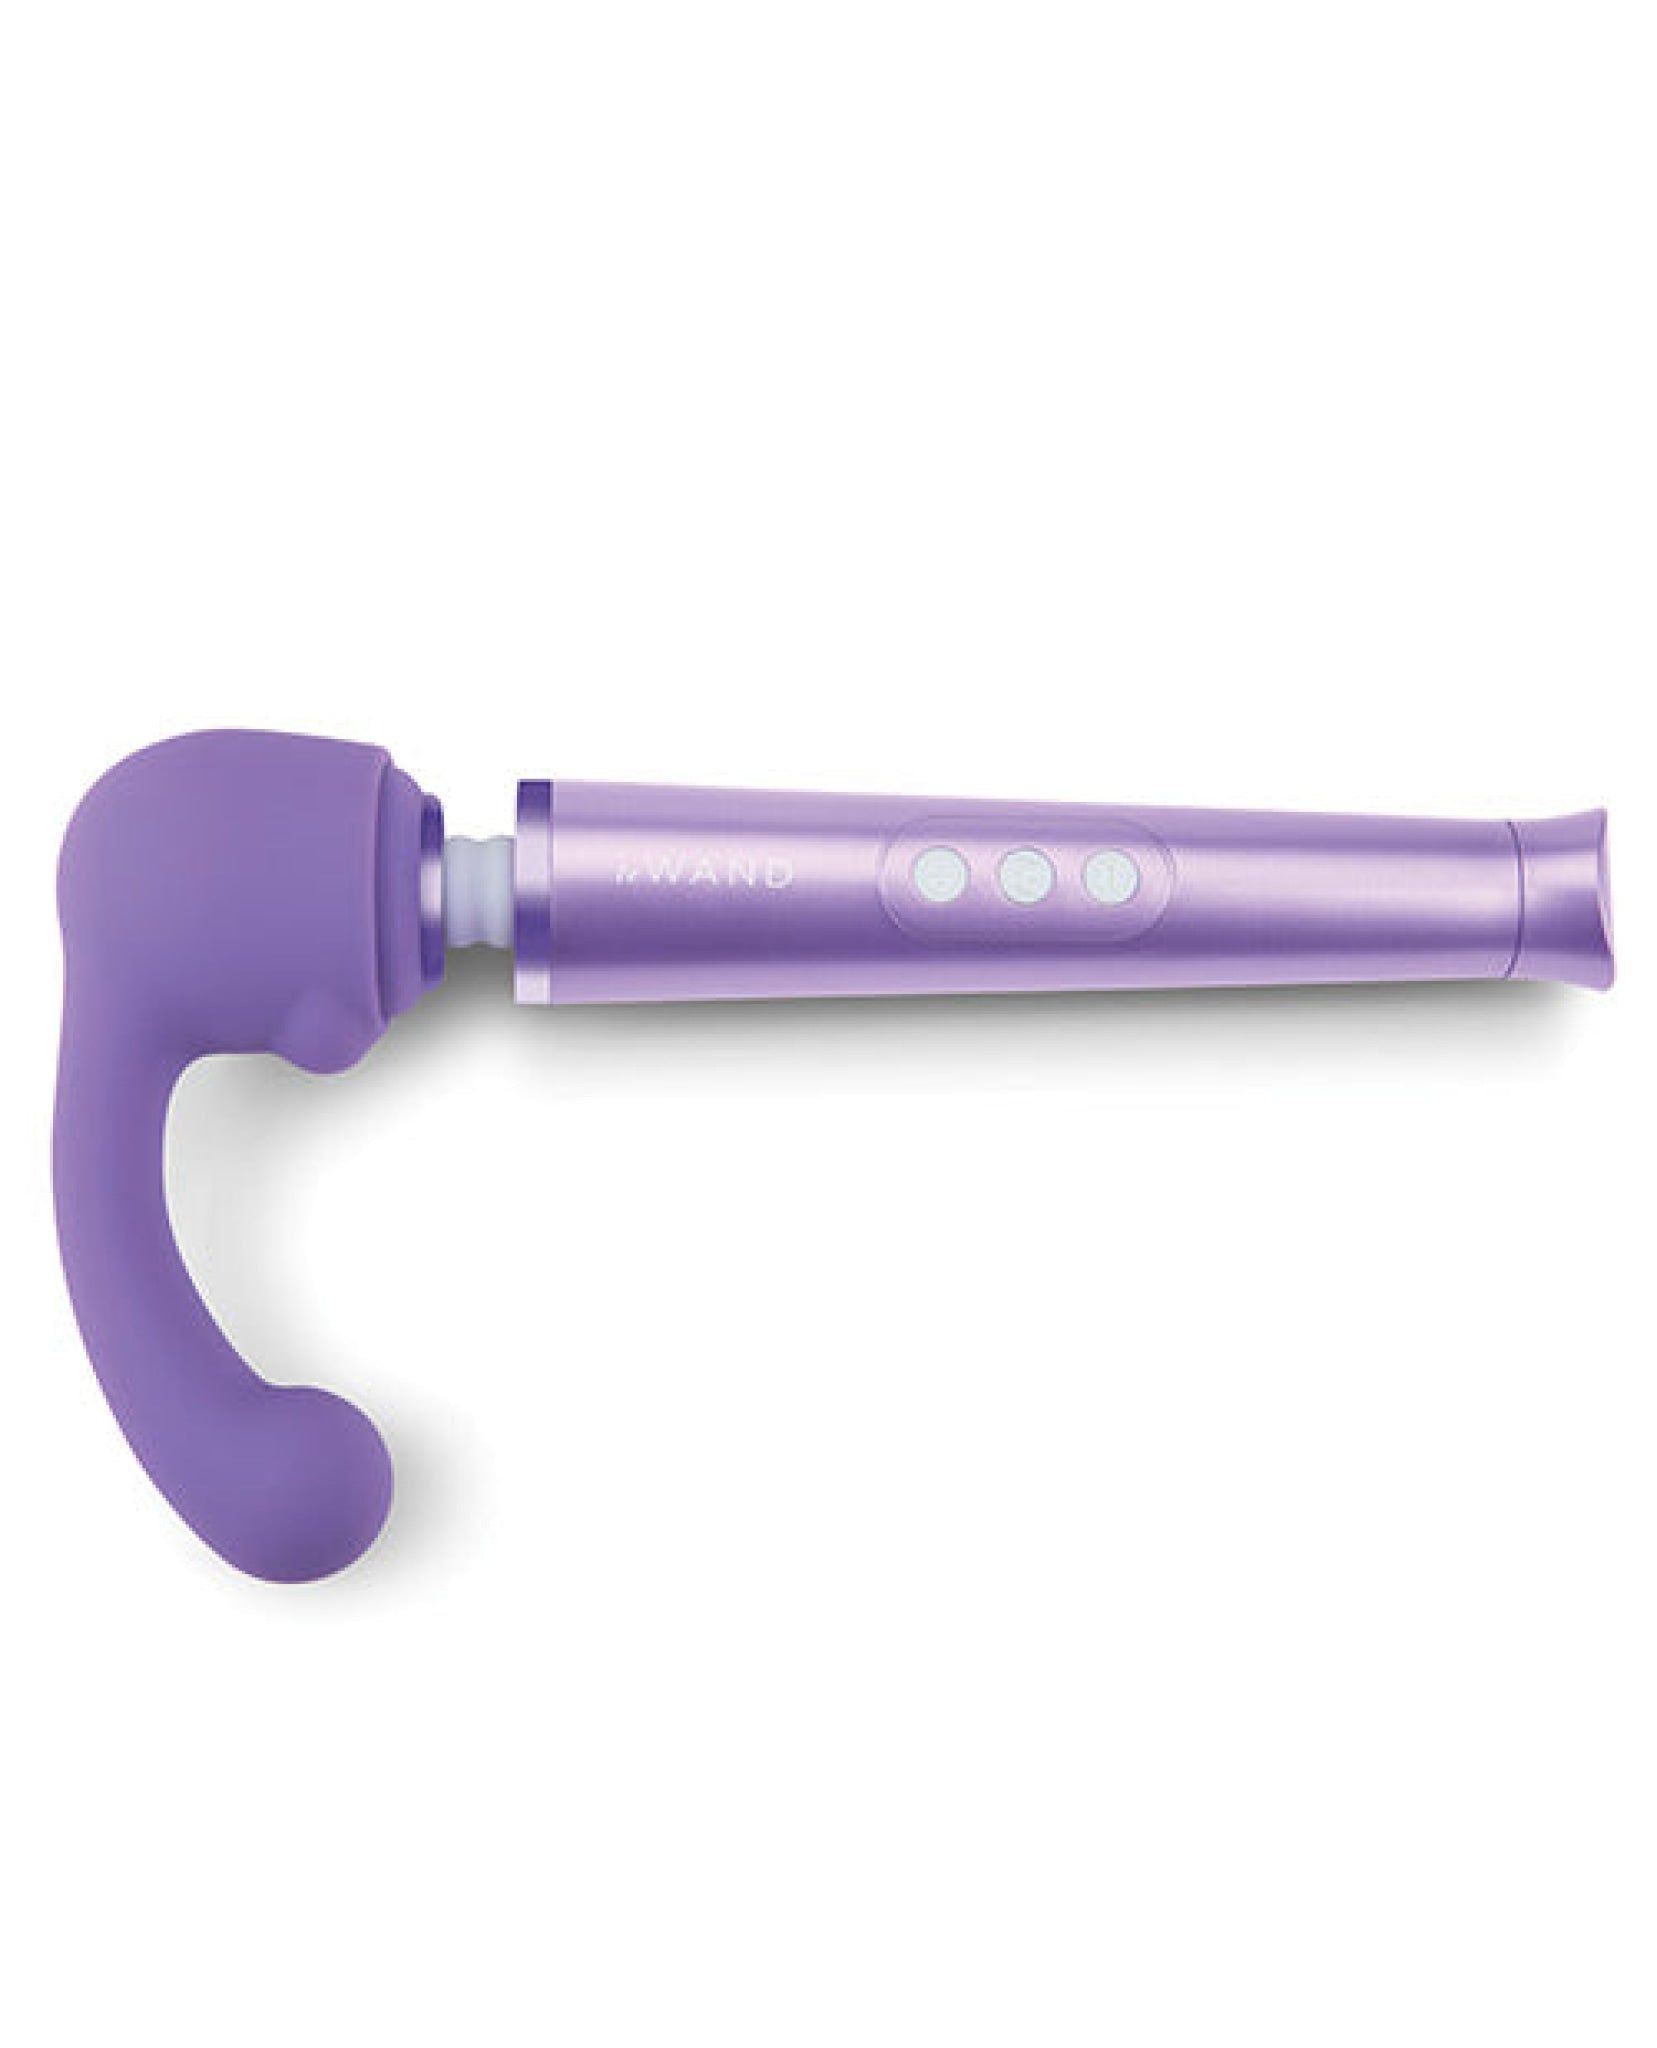 Le Wand Curve Petite Weighted Silicone Attachment Le Wand